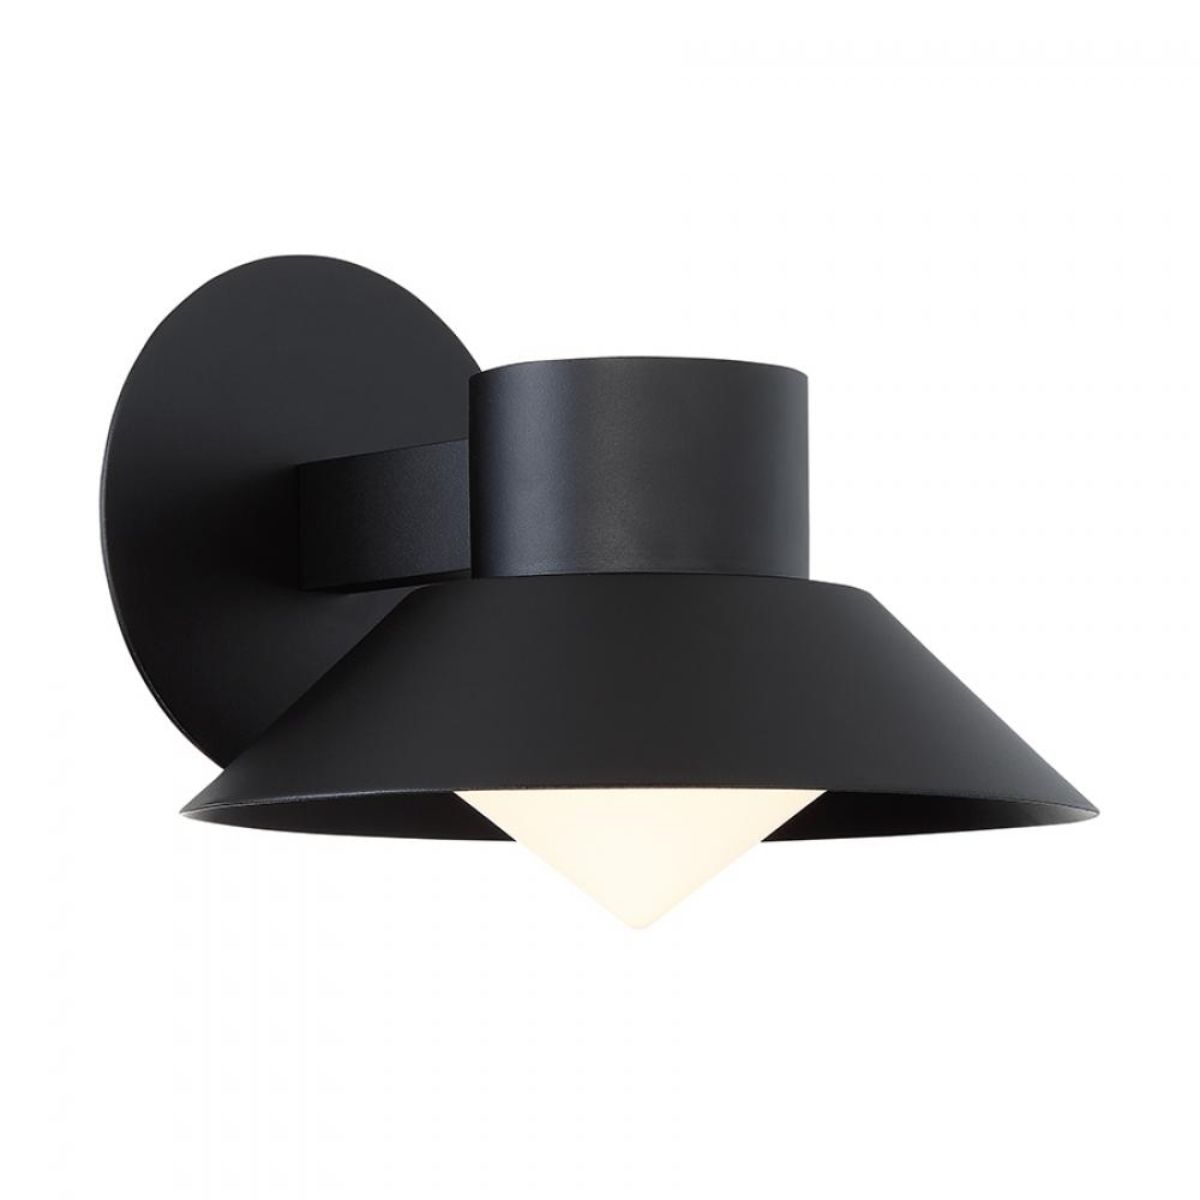 Oslo 11 in. LED Armed Sconce Black finish